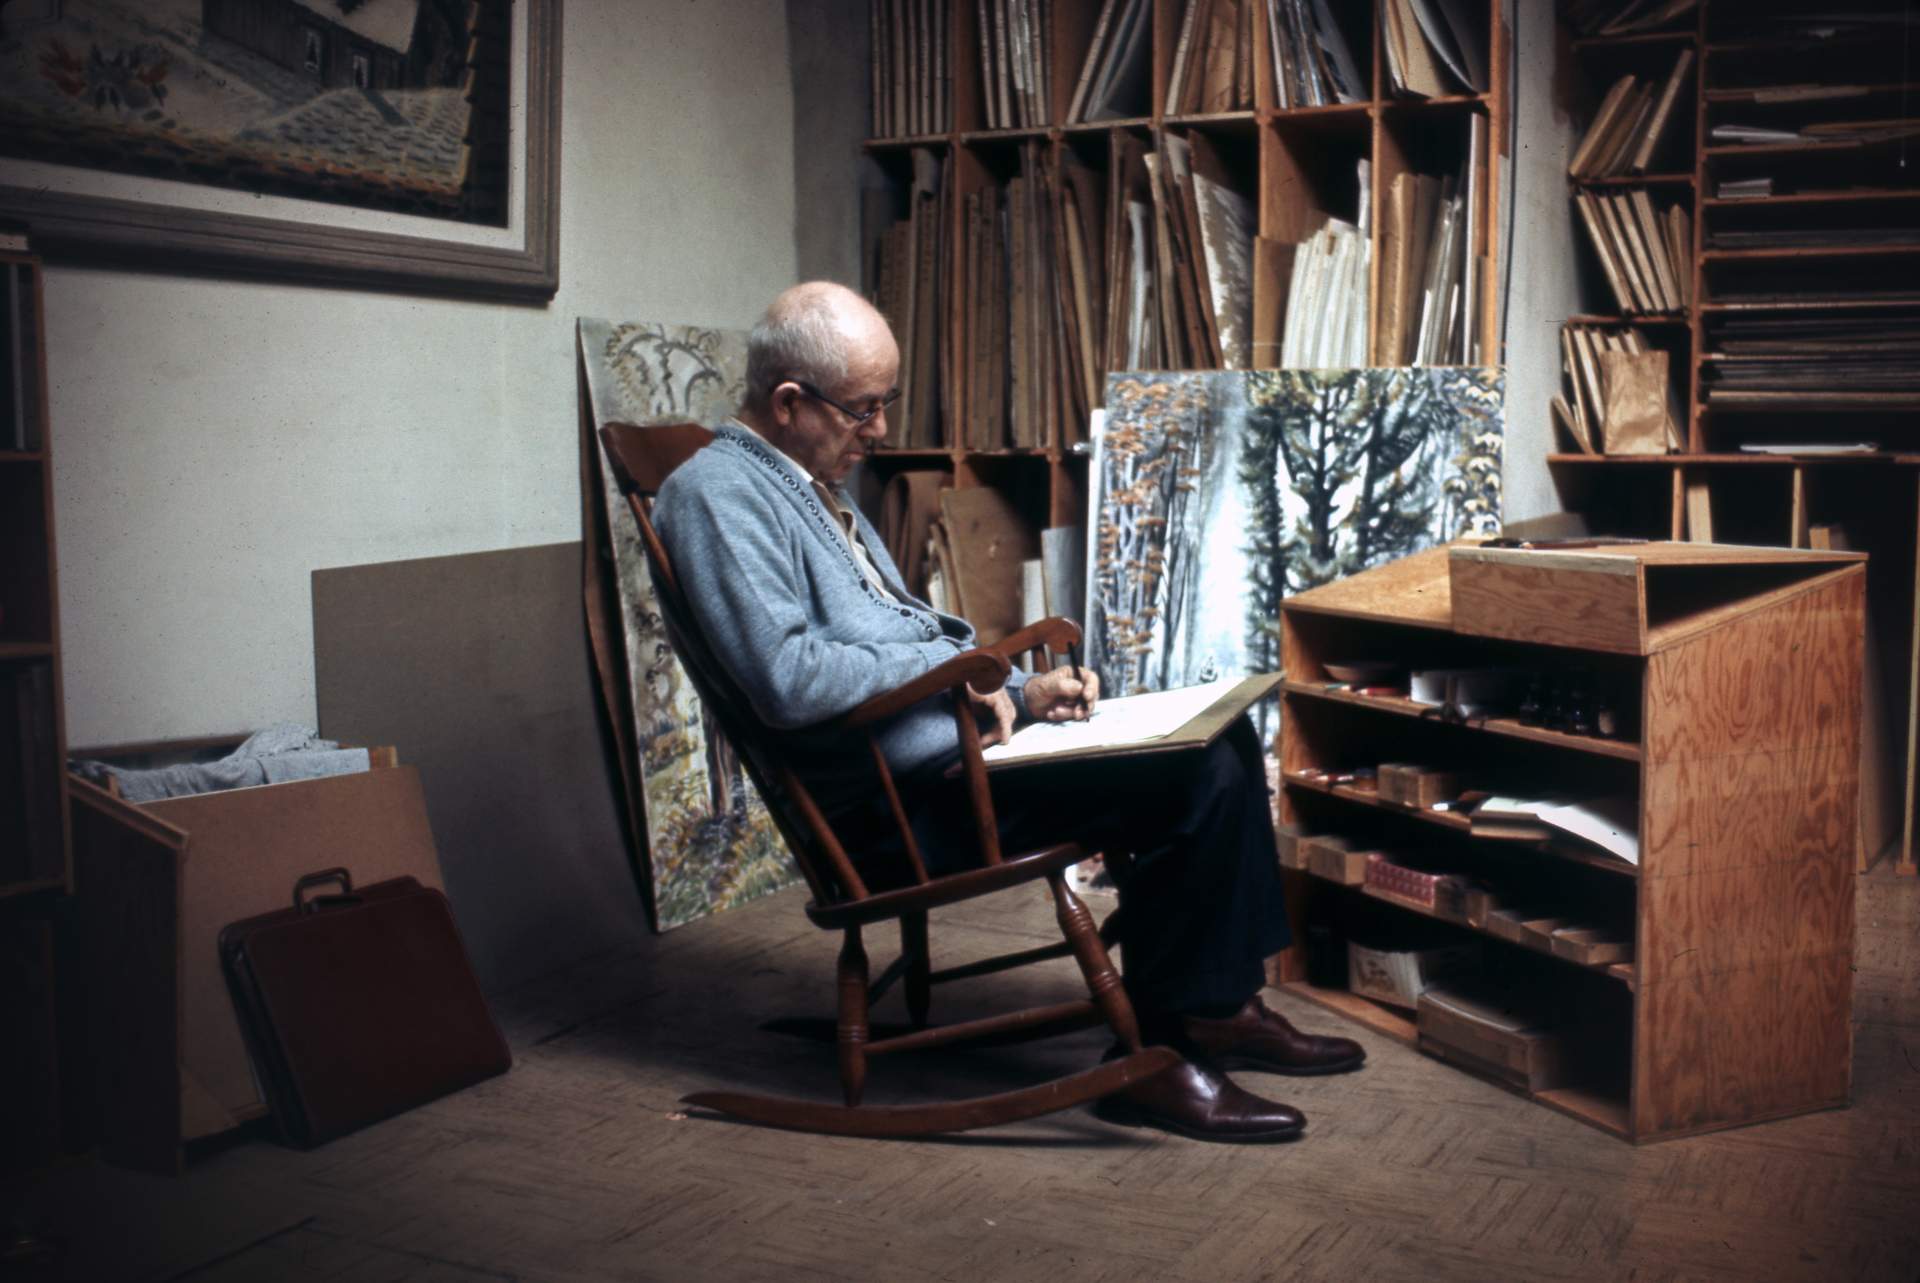 Photograph of Charles E. Burchfield sketching in his studio